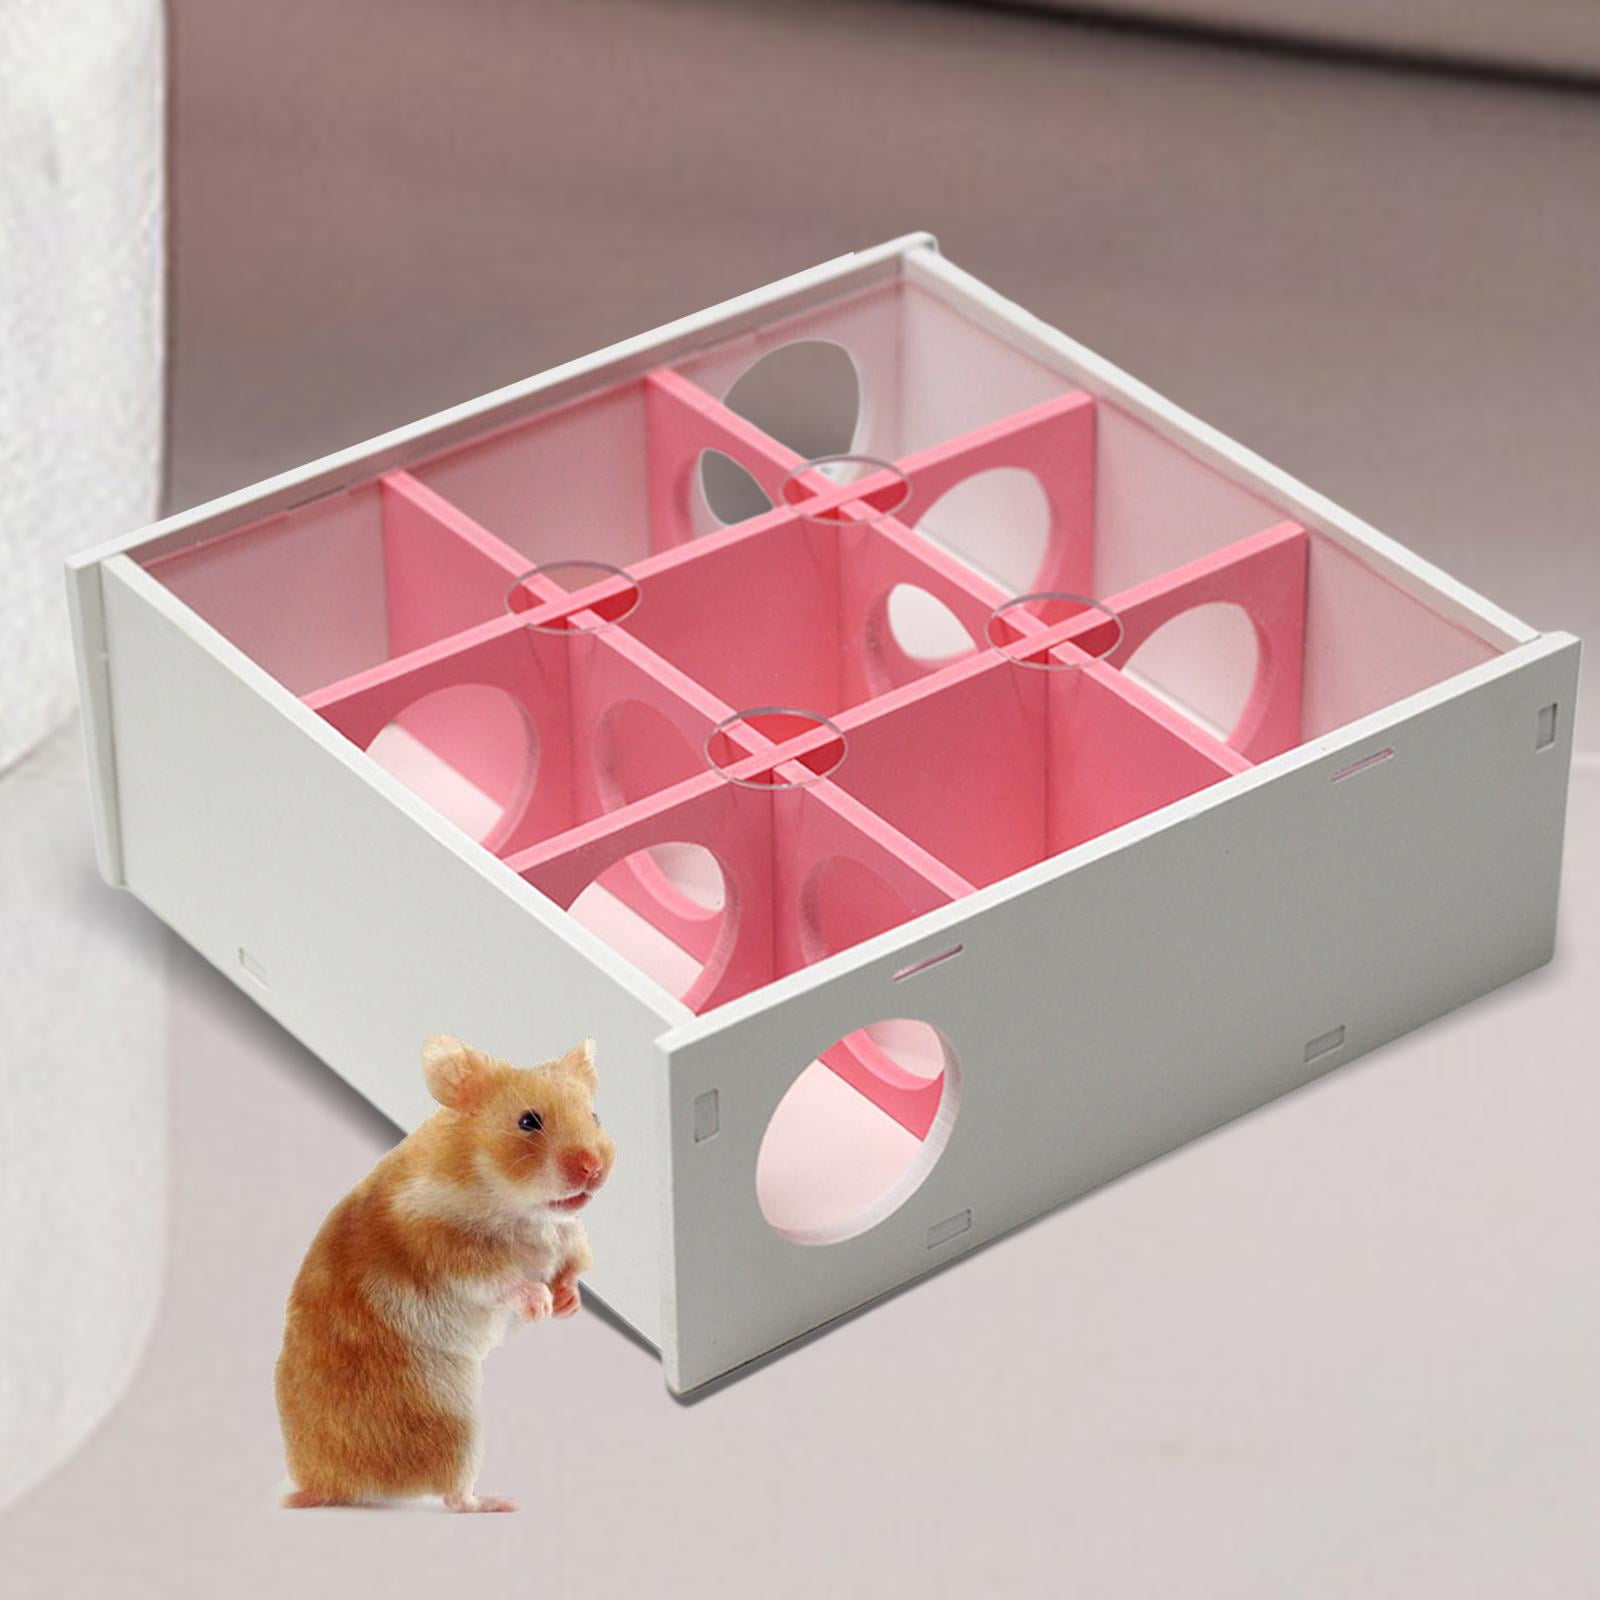 Hamster Wooden Maze Tunnel with Transparent Plastic Cover and Chew Toys Comfortable Playhouse for Guinea Pigs and Small Animals to Play and Sleep Style 1 